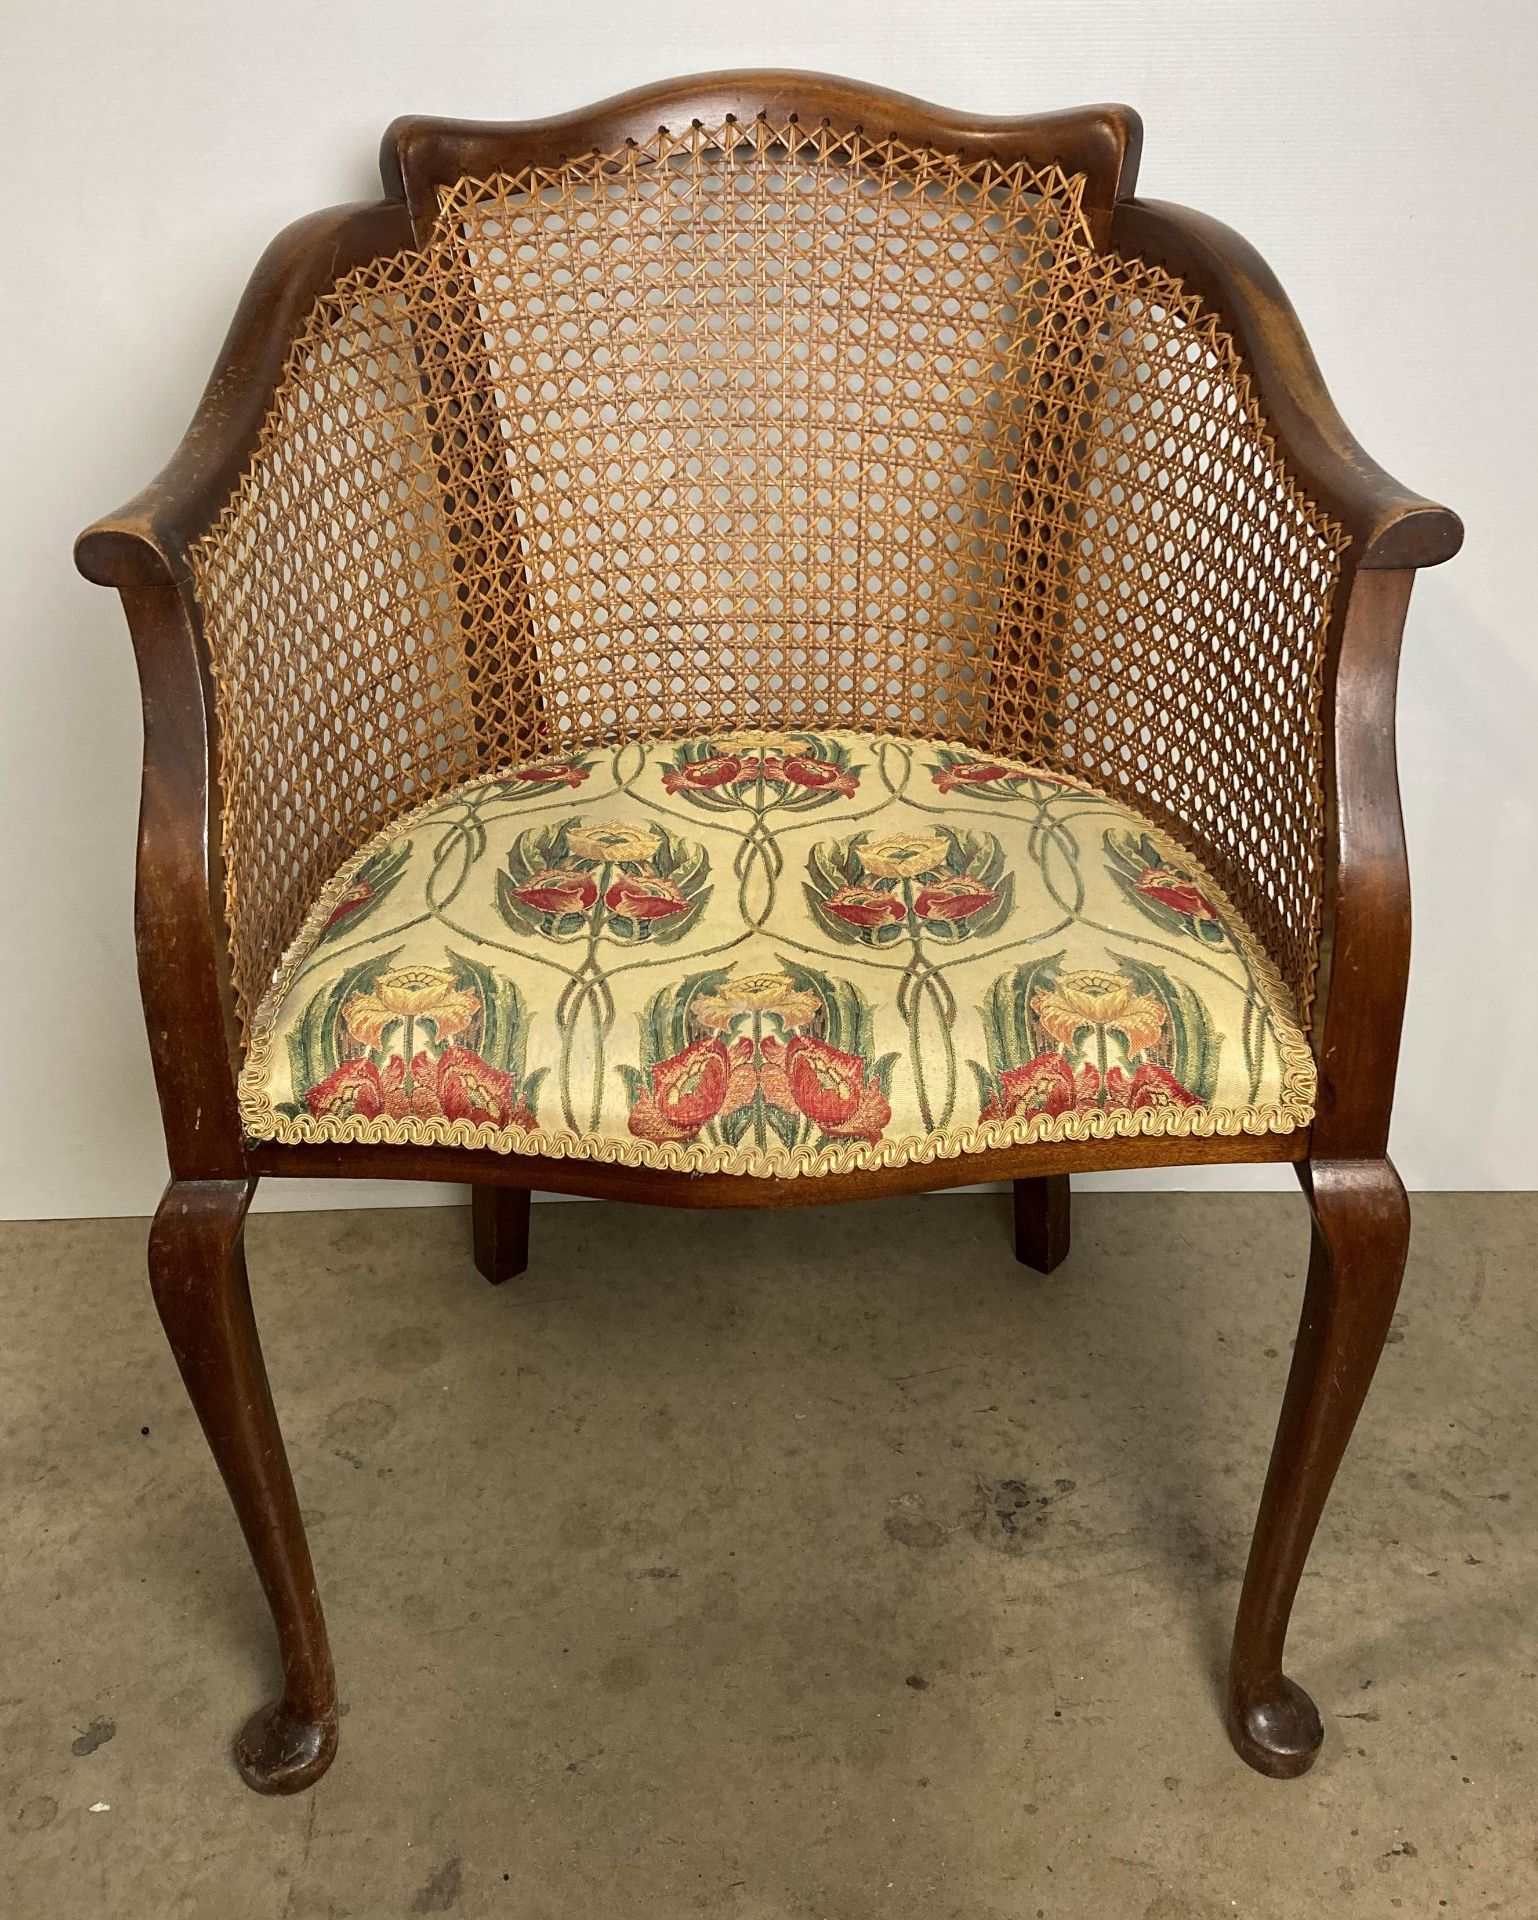 A vintage Bergère armchair with floral upholstered seat fabric (saleroom location: S2 QB13)